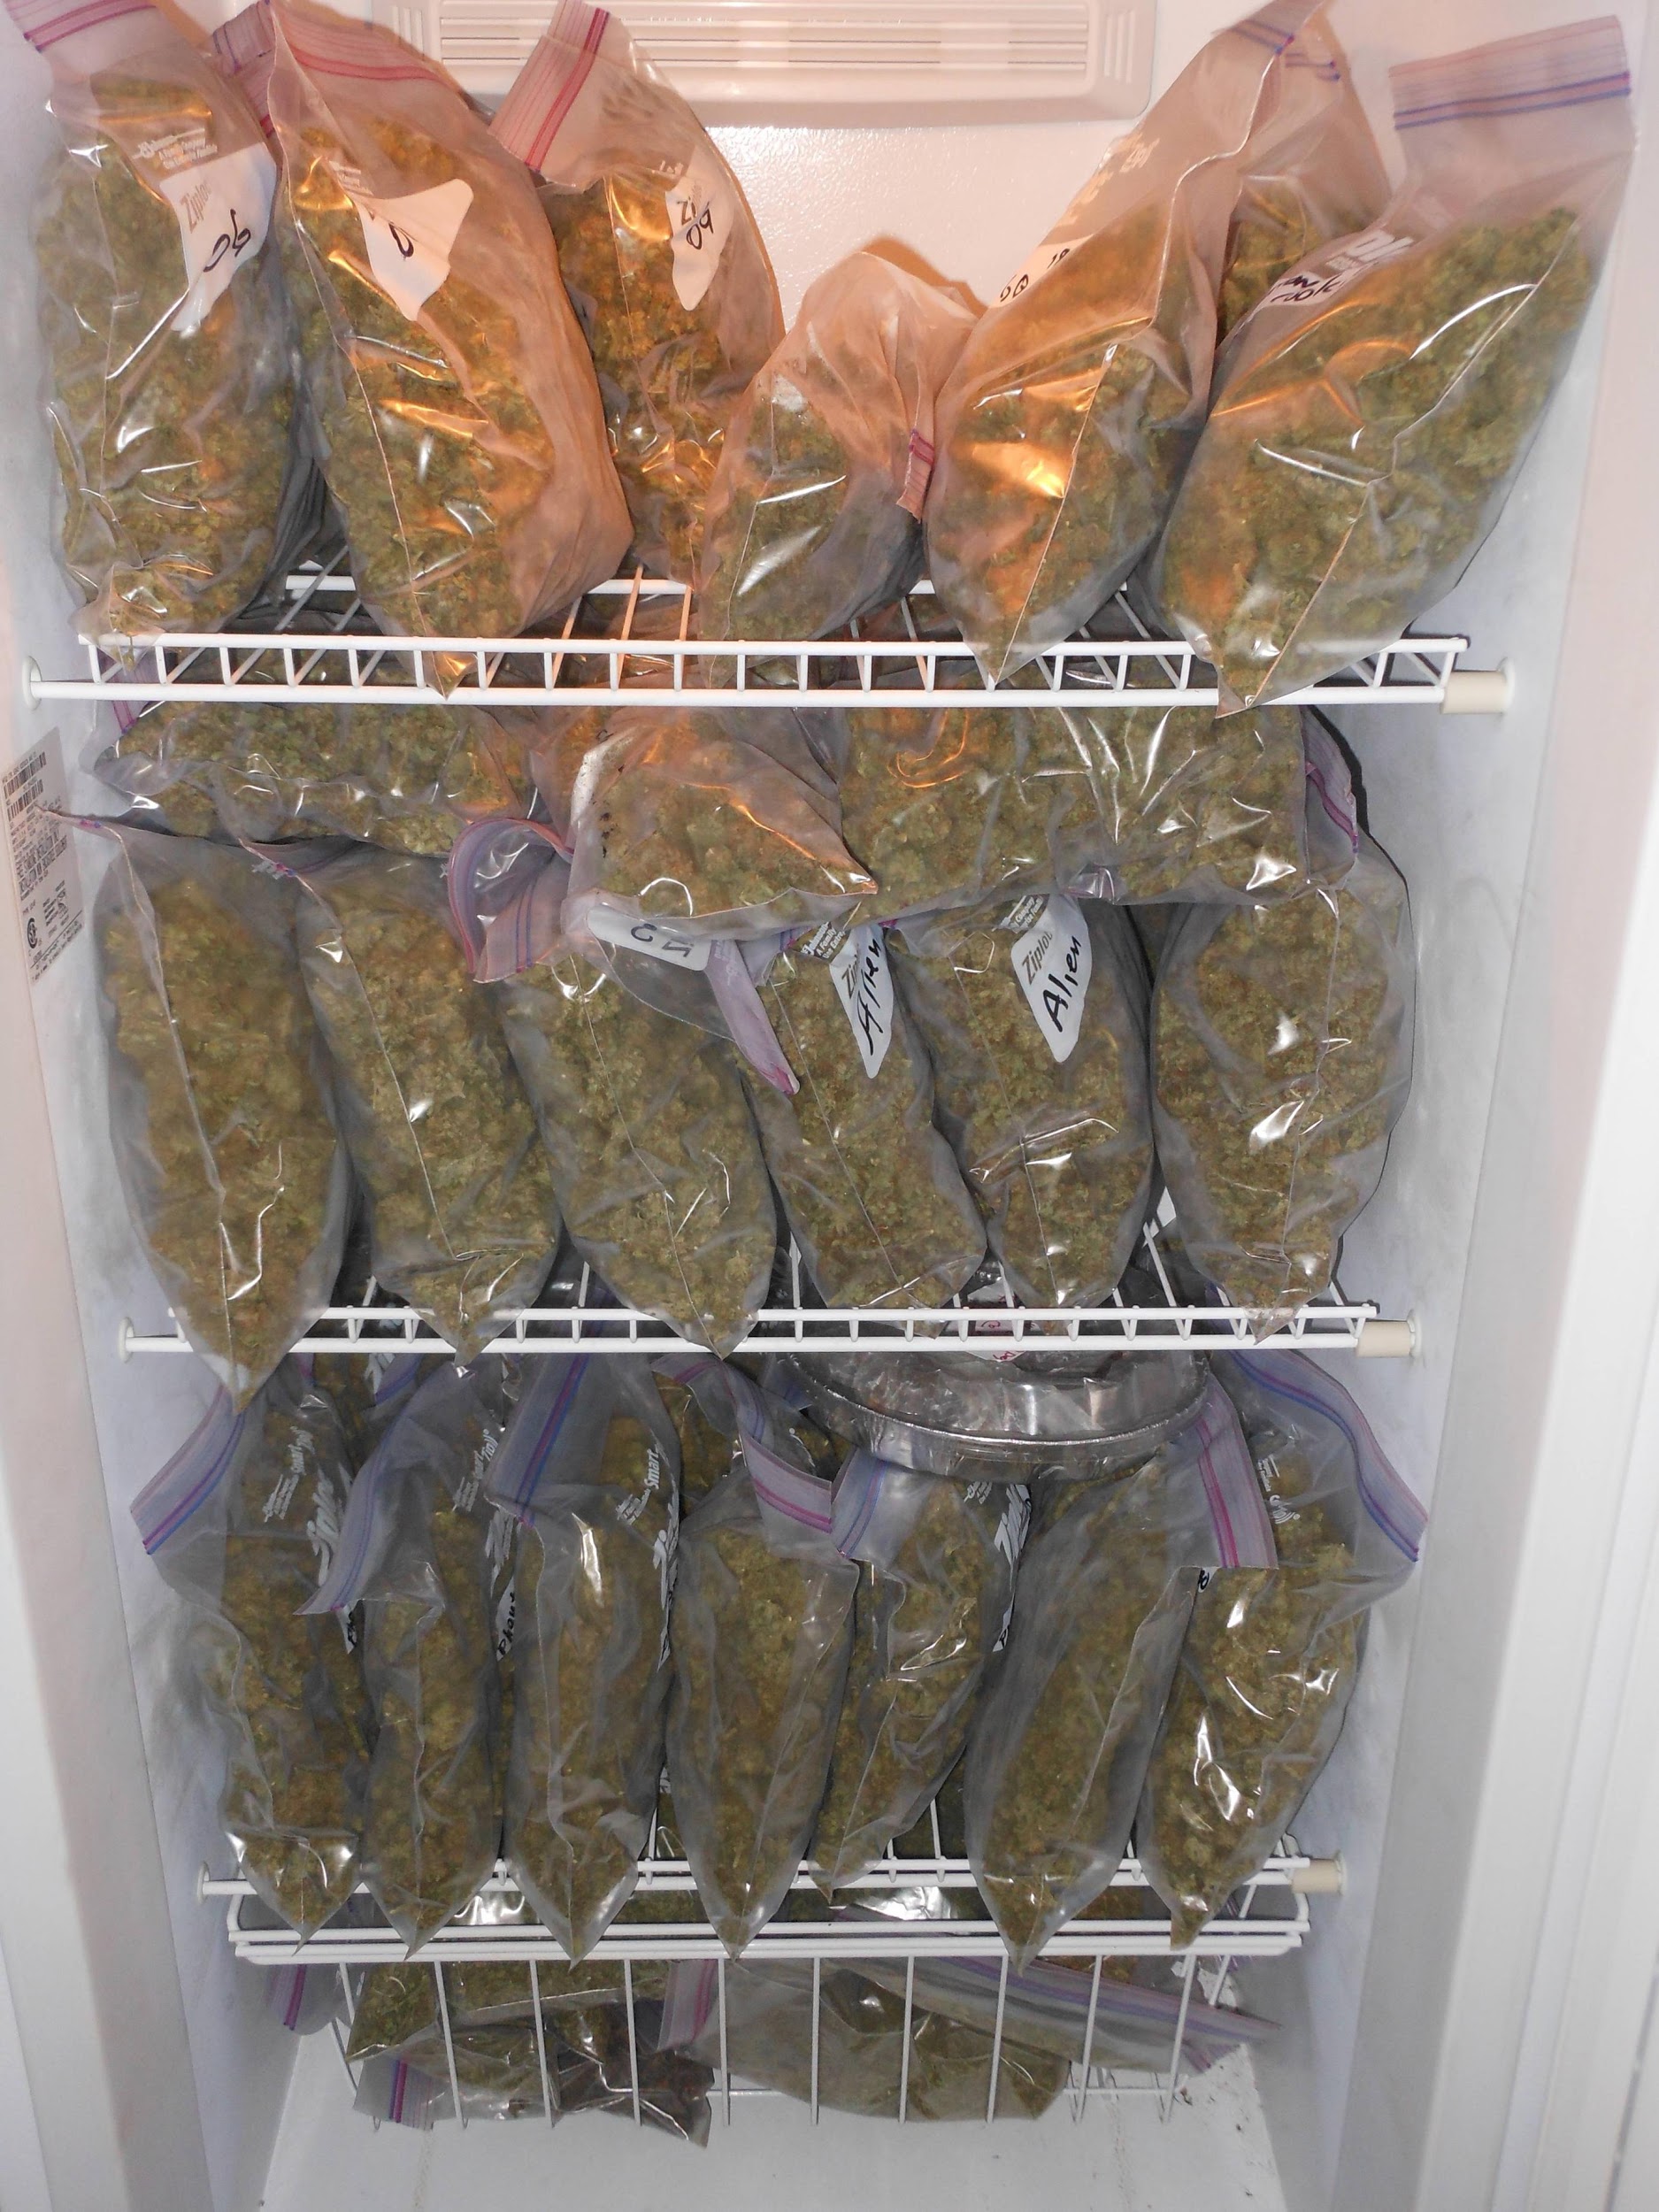 Store Weed In The Freezer